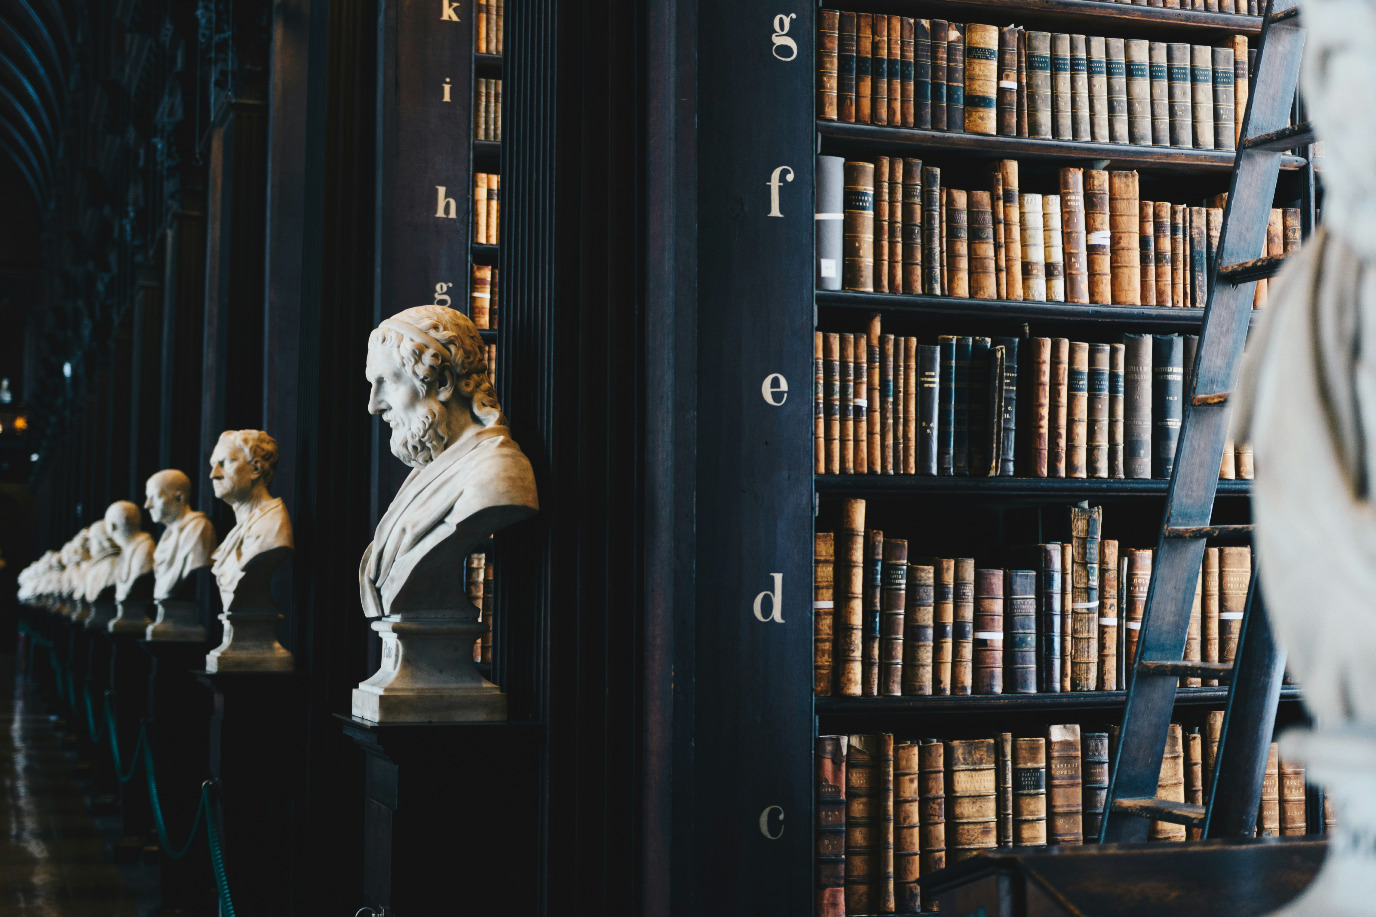 Shelves filled with old books from a prestigious-looking library with sculpted busts of academics